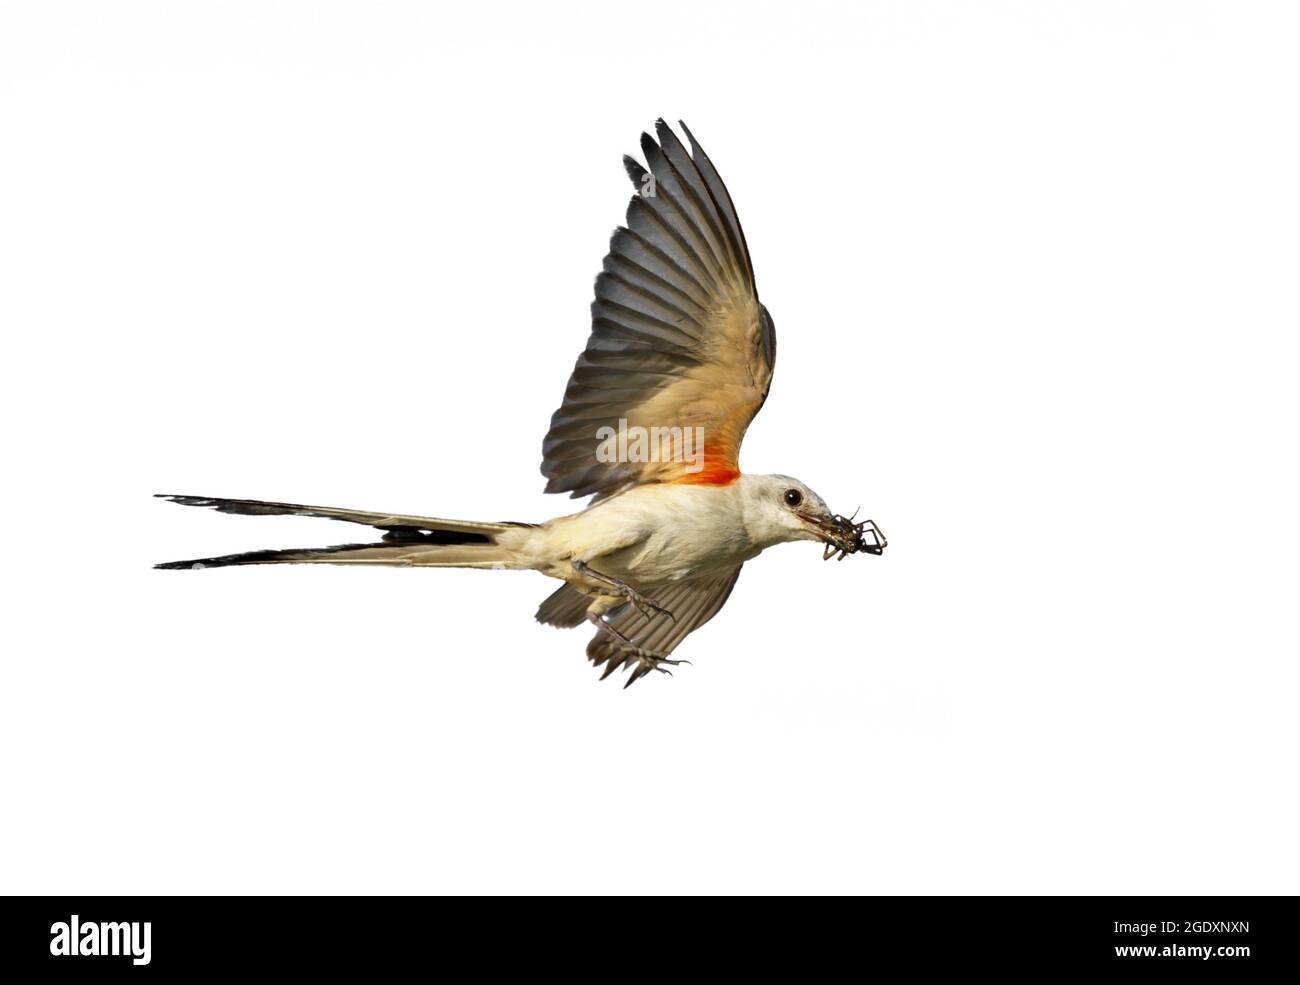 Scissor-tailed flycatcher (Tyrannus forficatus) flying with an insect in the beak, isolated on white background. Stock Photo